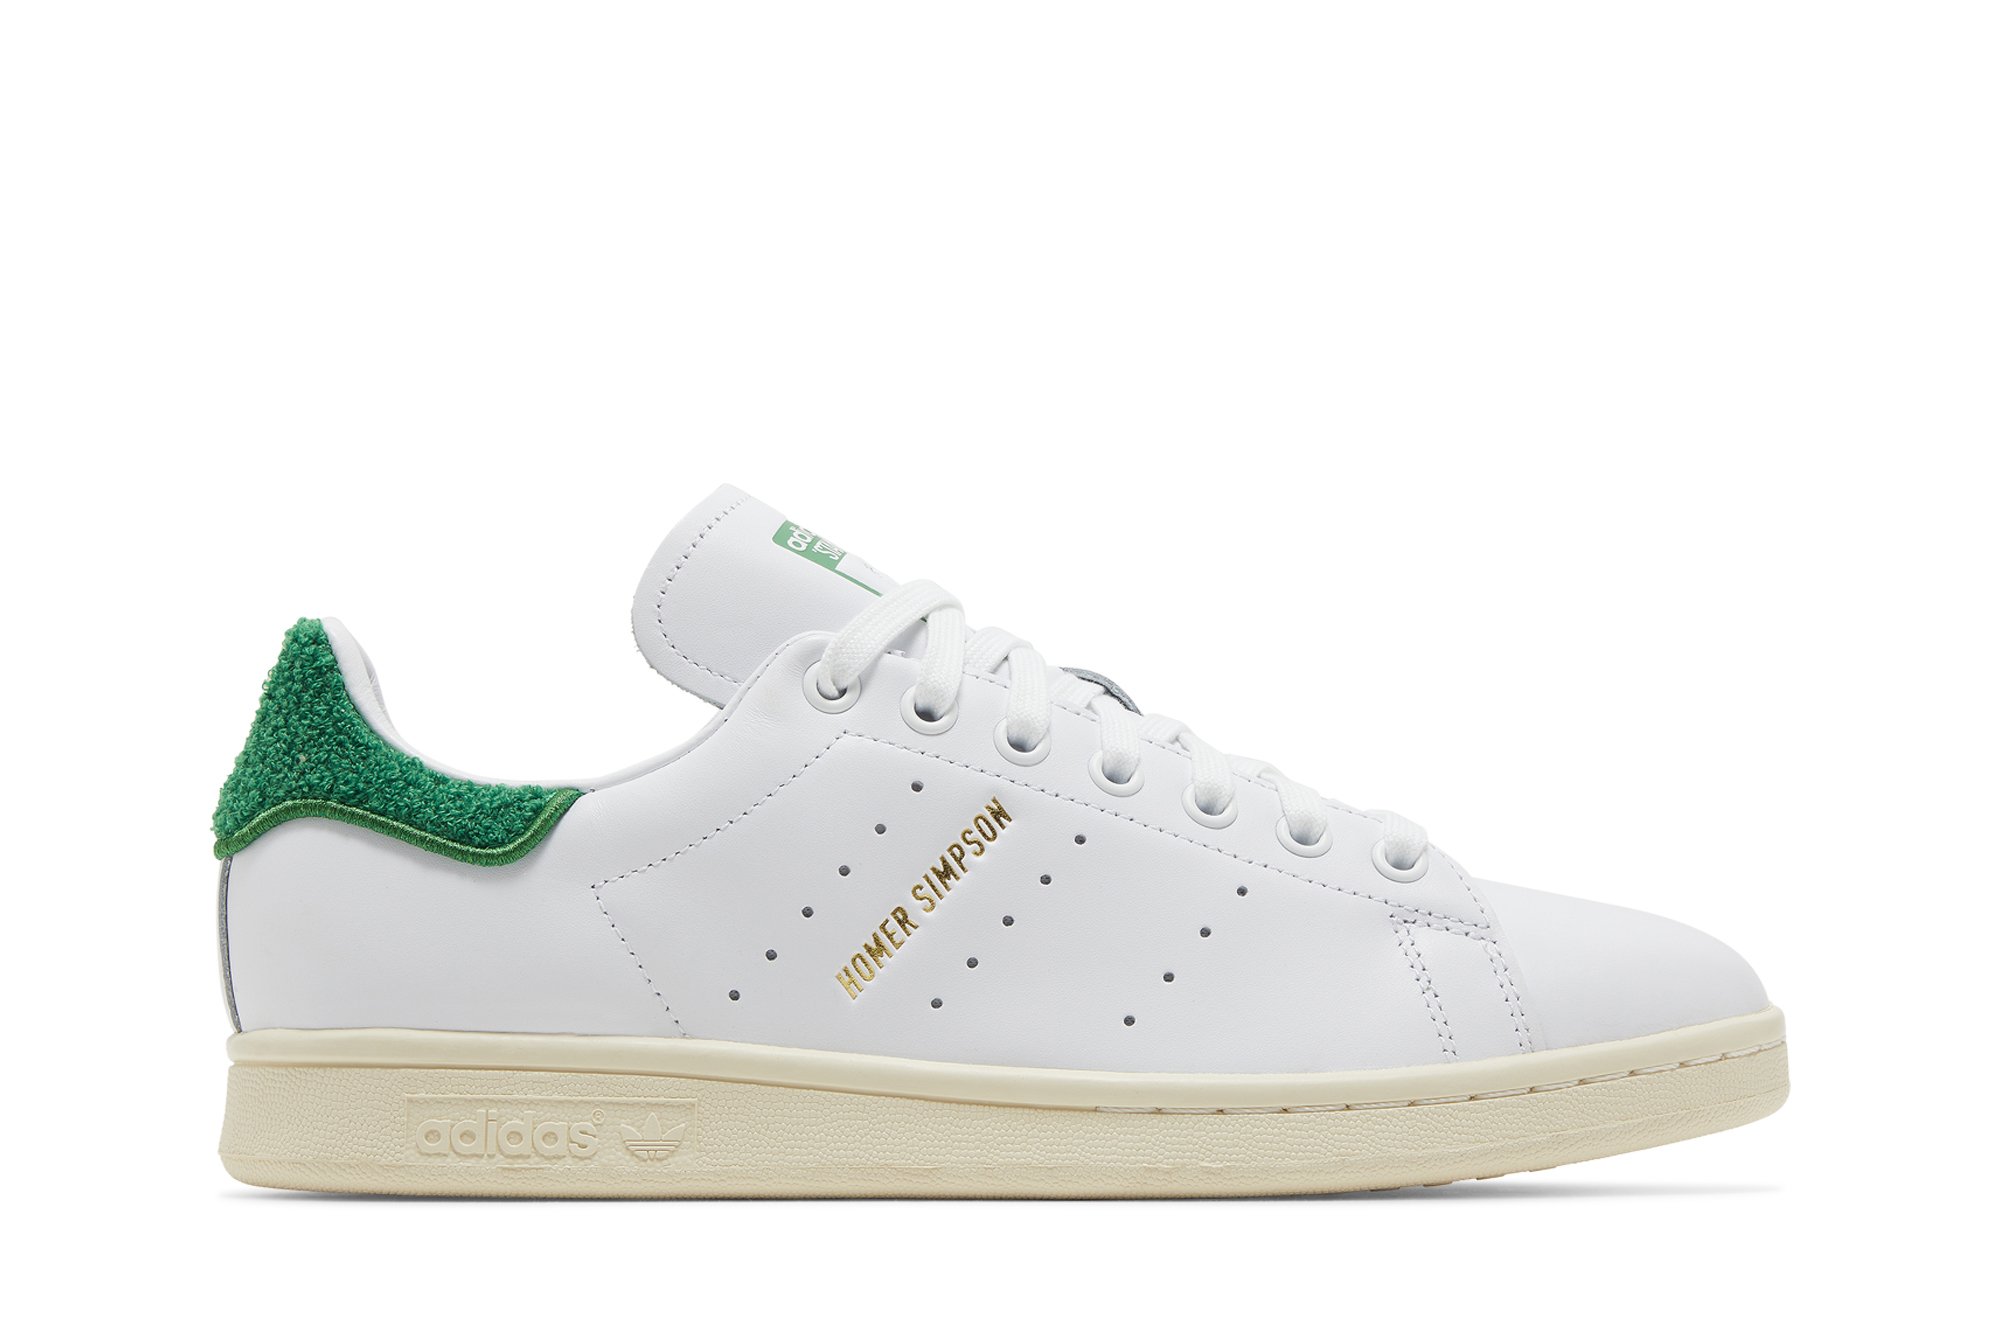 Buy The Simpsons x Stan Smith 'Homer Simpson' - IE7564 | GOAT